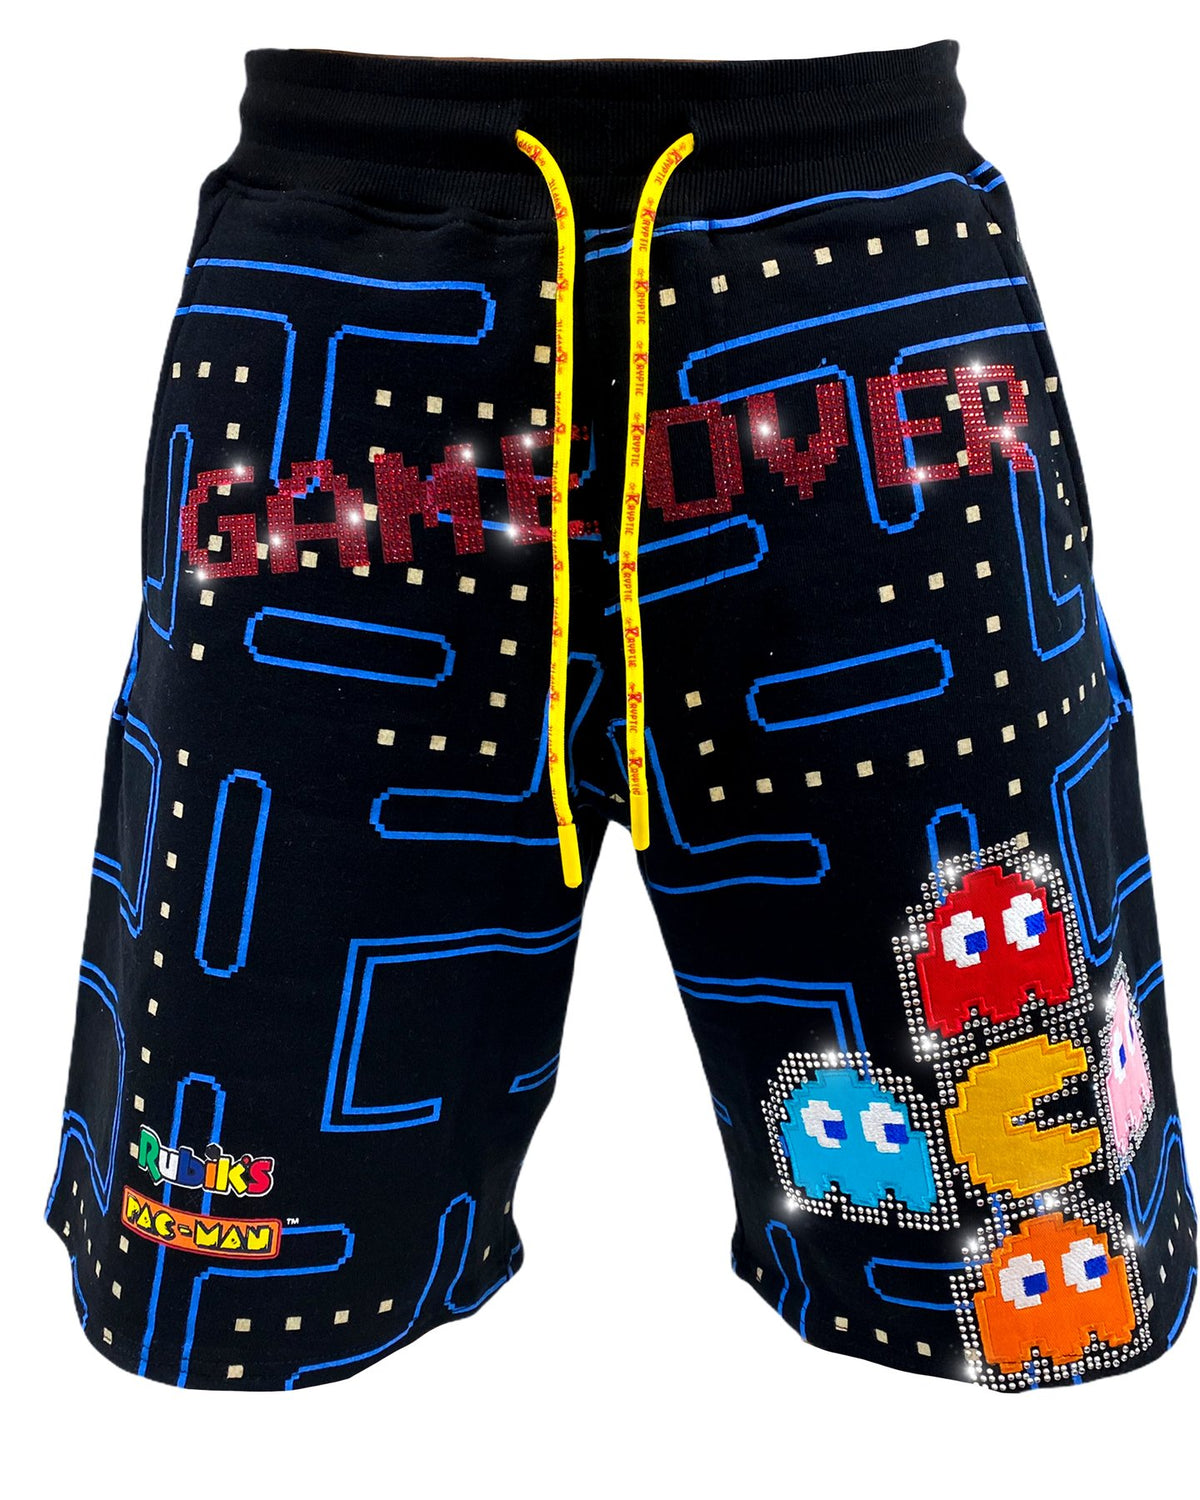 DeKryptic x Rubik's x Pac-Man - GAME OVER Embroidered Stoned Set